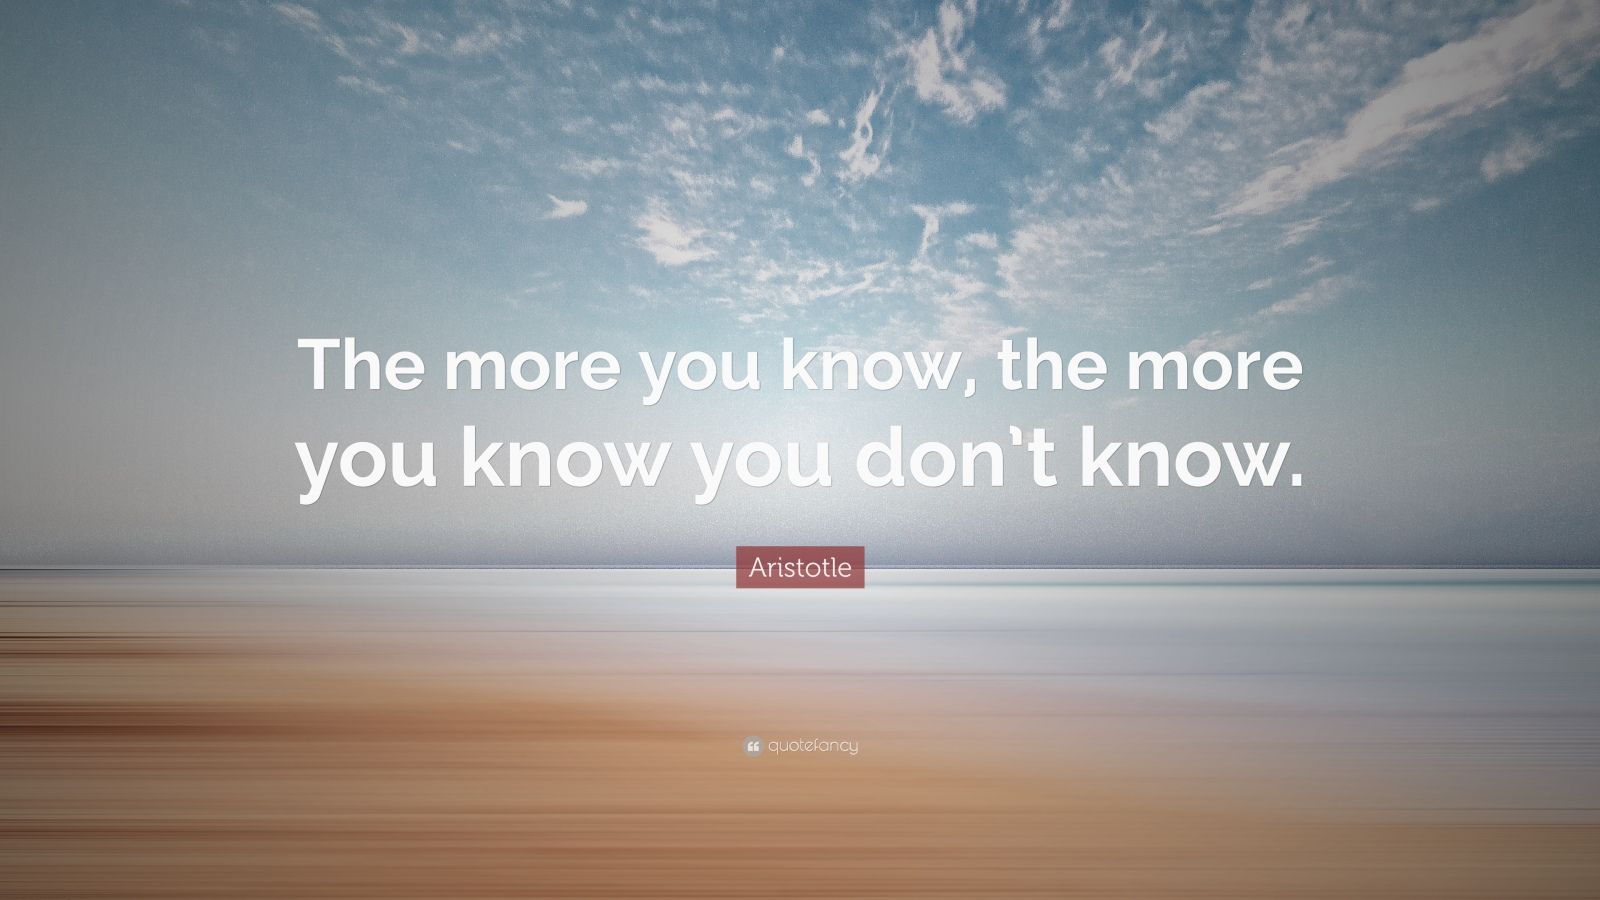 Aristotle Quote: “The more you know, the more you know you don’t know